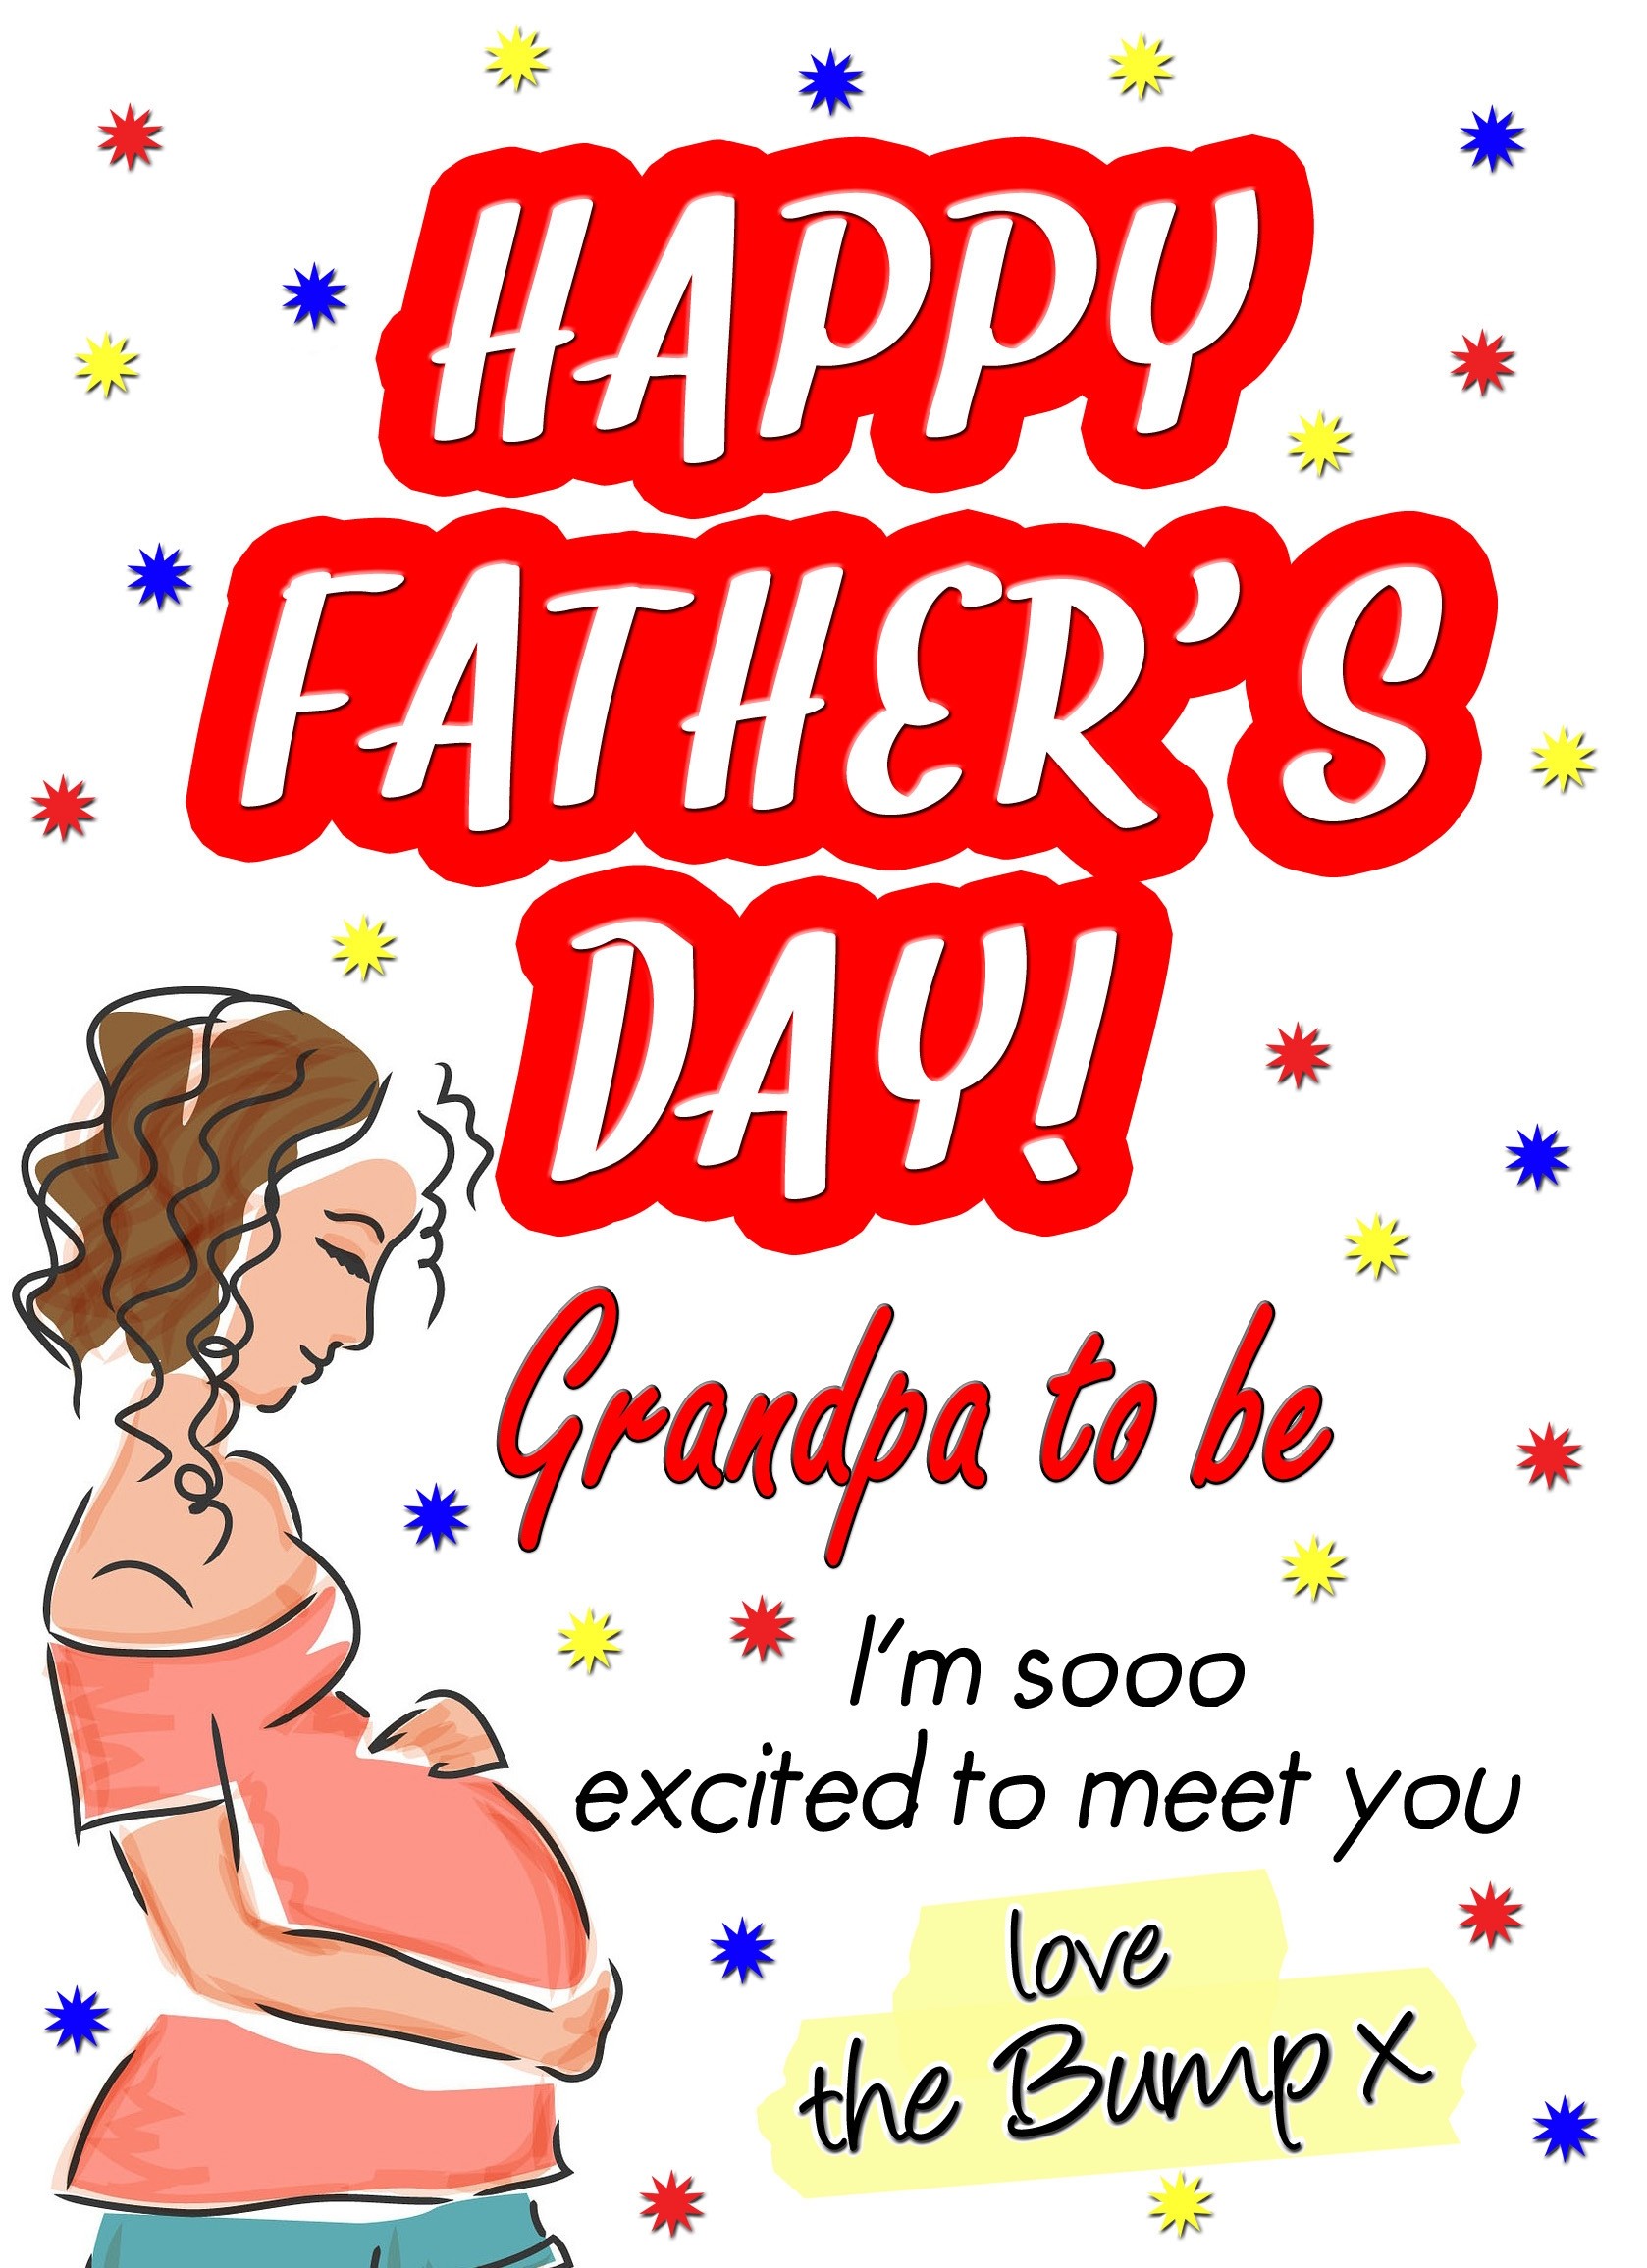 From The Bump Pregnancy Fathers Day Card (Grandpa, White)